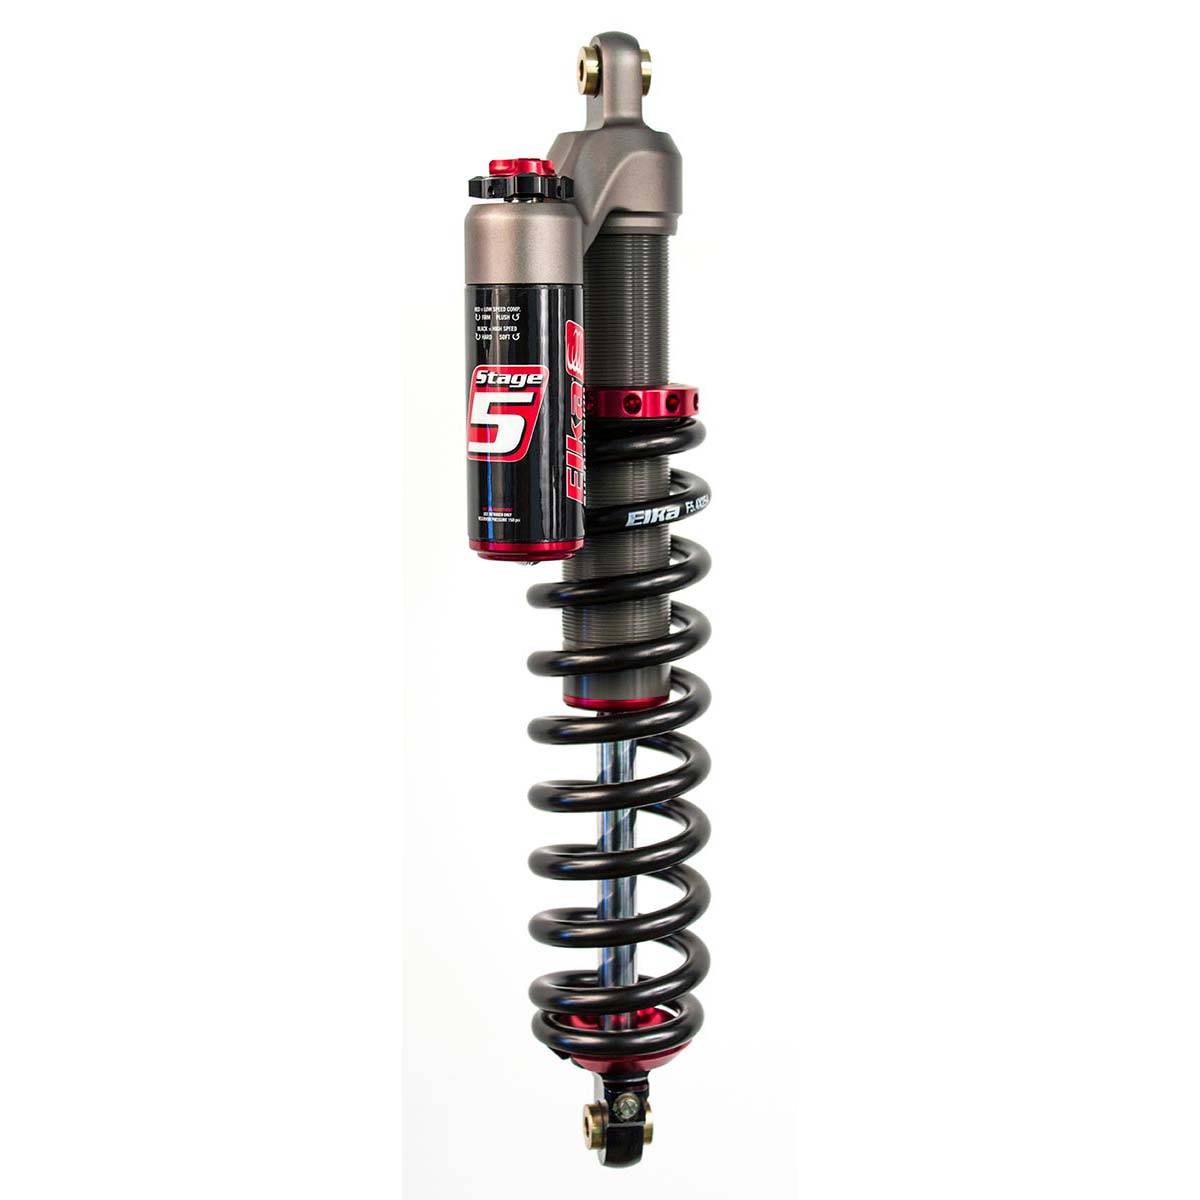 Elka STAGE 5 FRONT SHOCKS for ARCTIC CAT XF 8000 SNO PRO (137), 2014 50579